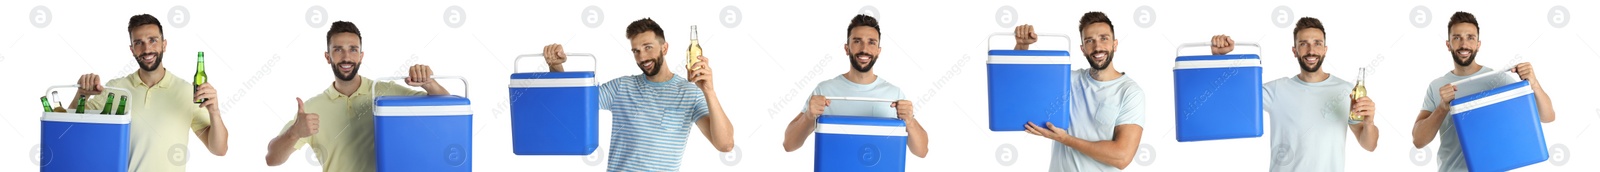 Image of Collage with photos of man holding cool boxes on white background. Banner design